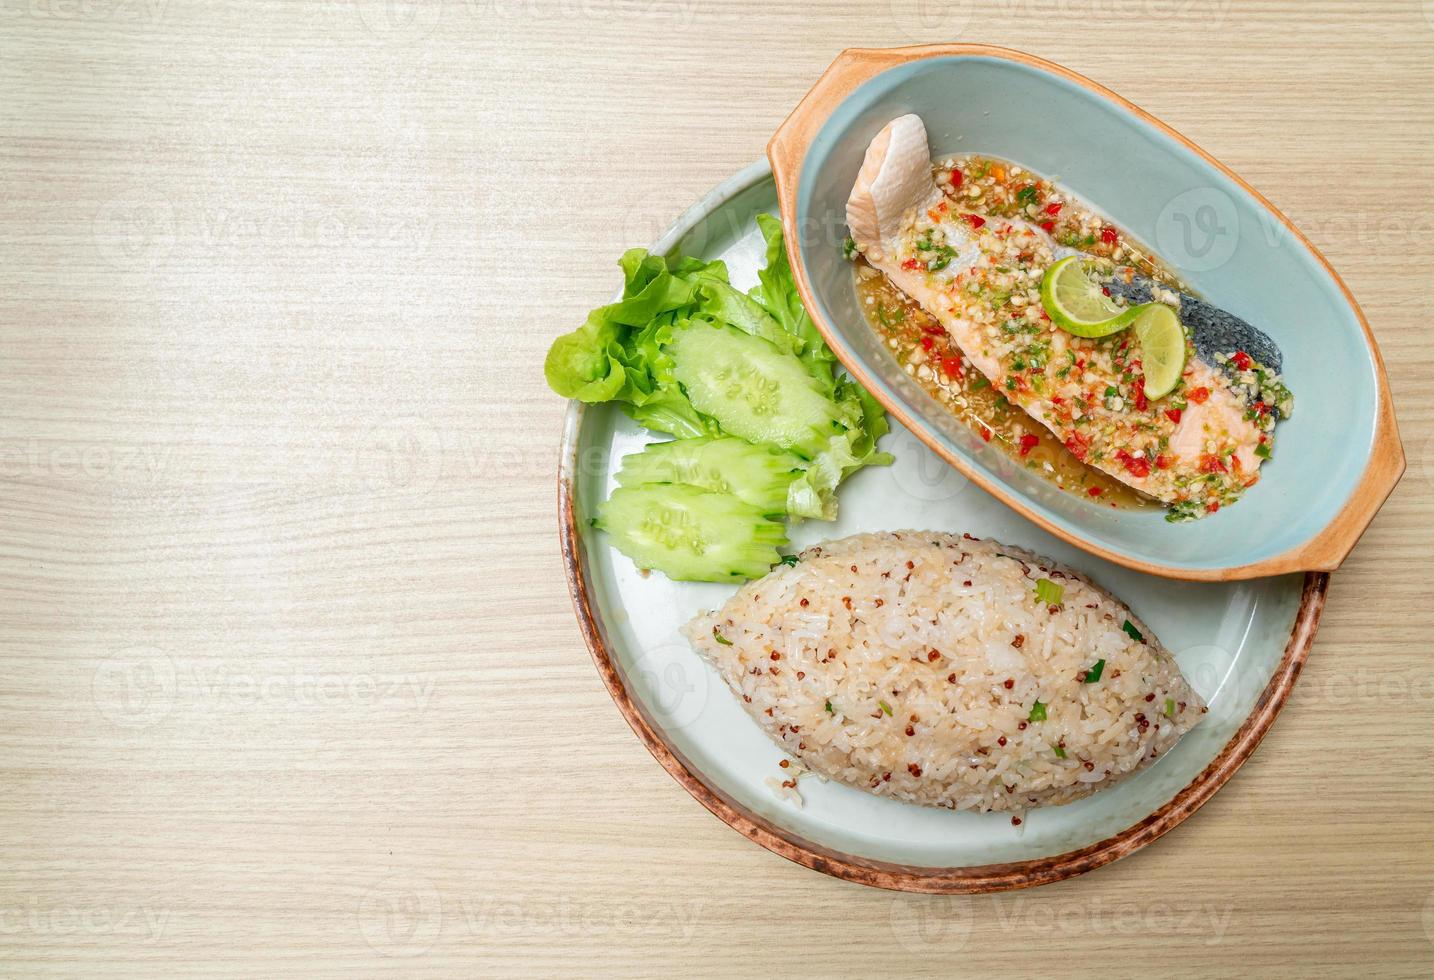 Quinoa fried rice with steamed salmon in lime chili dressing - healthy food style photo